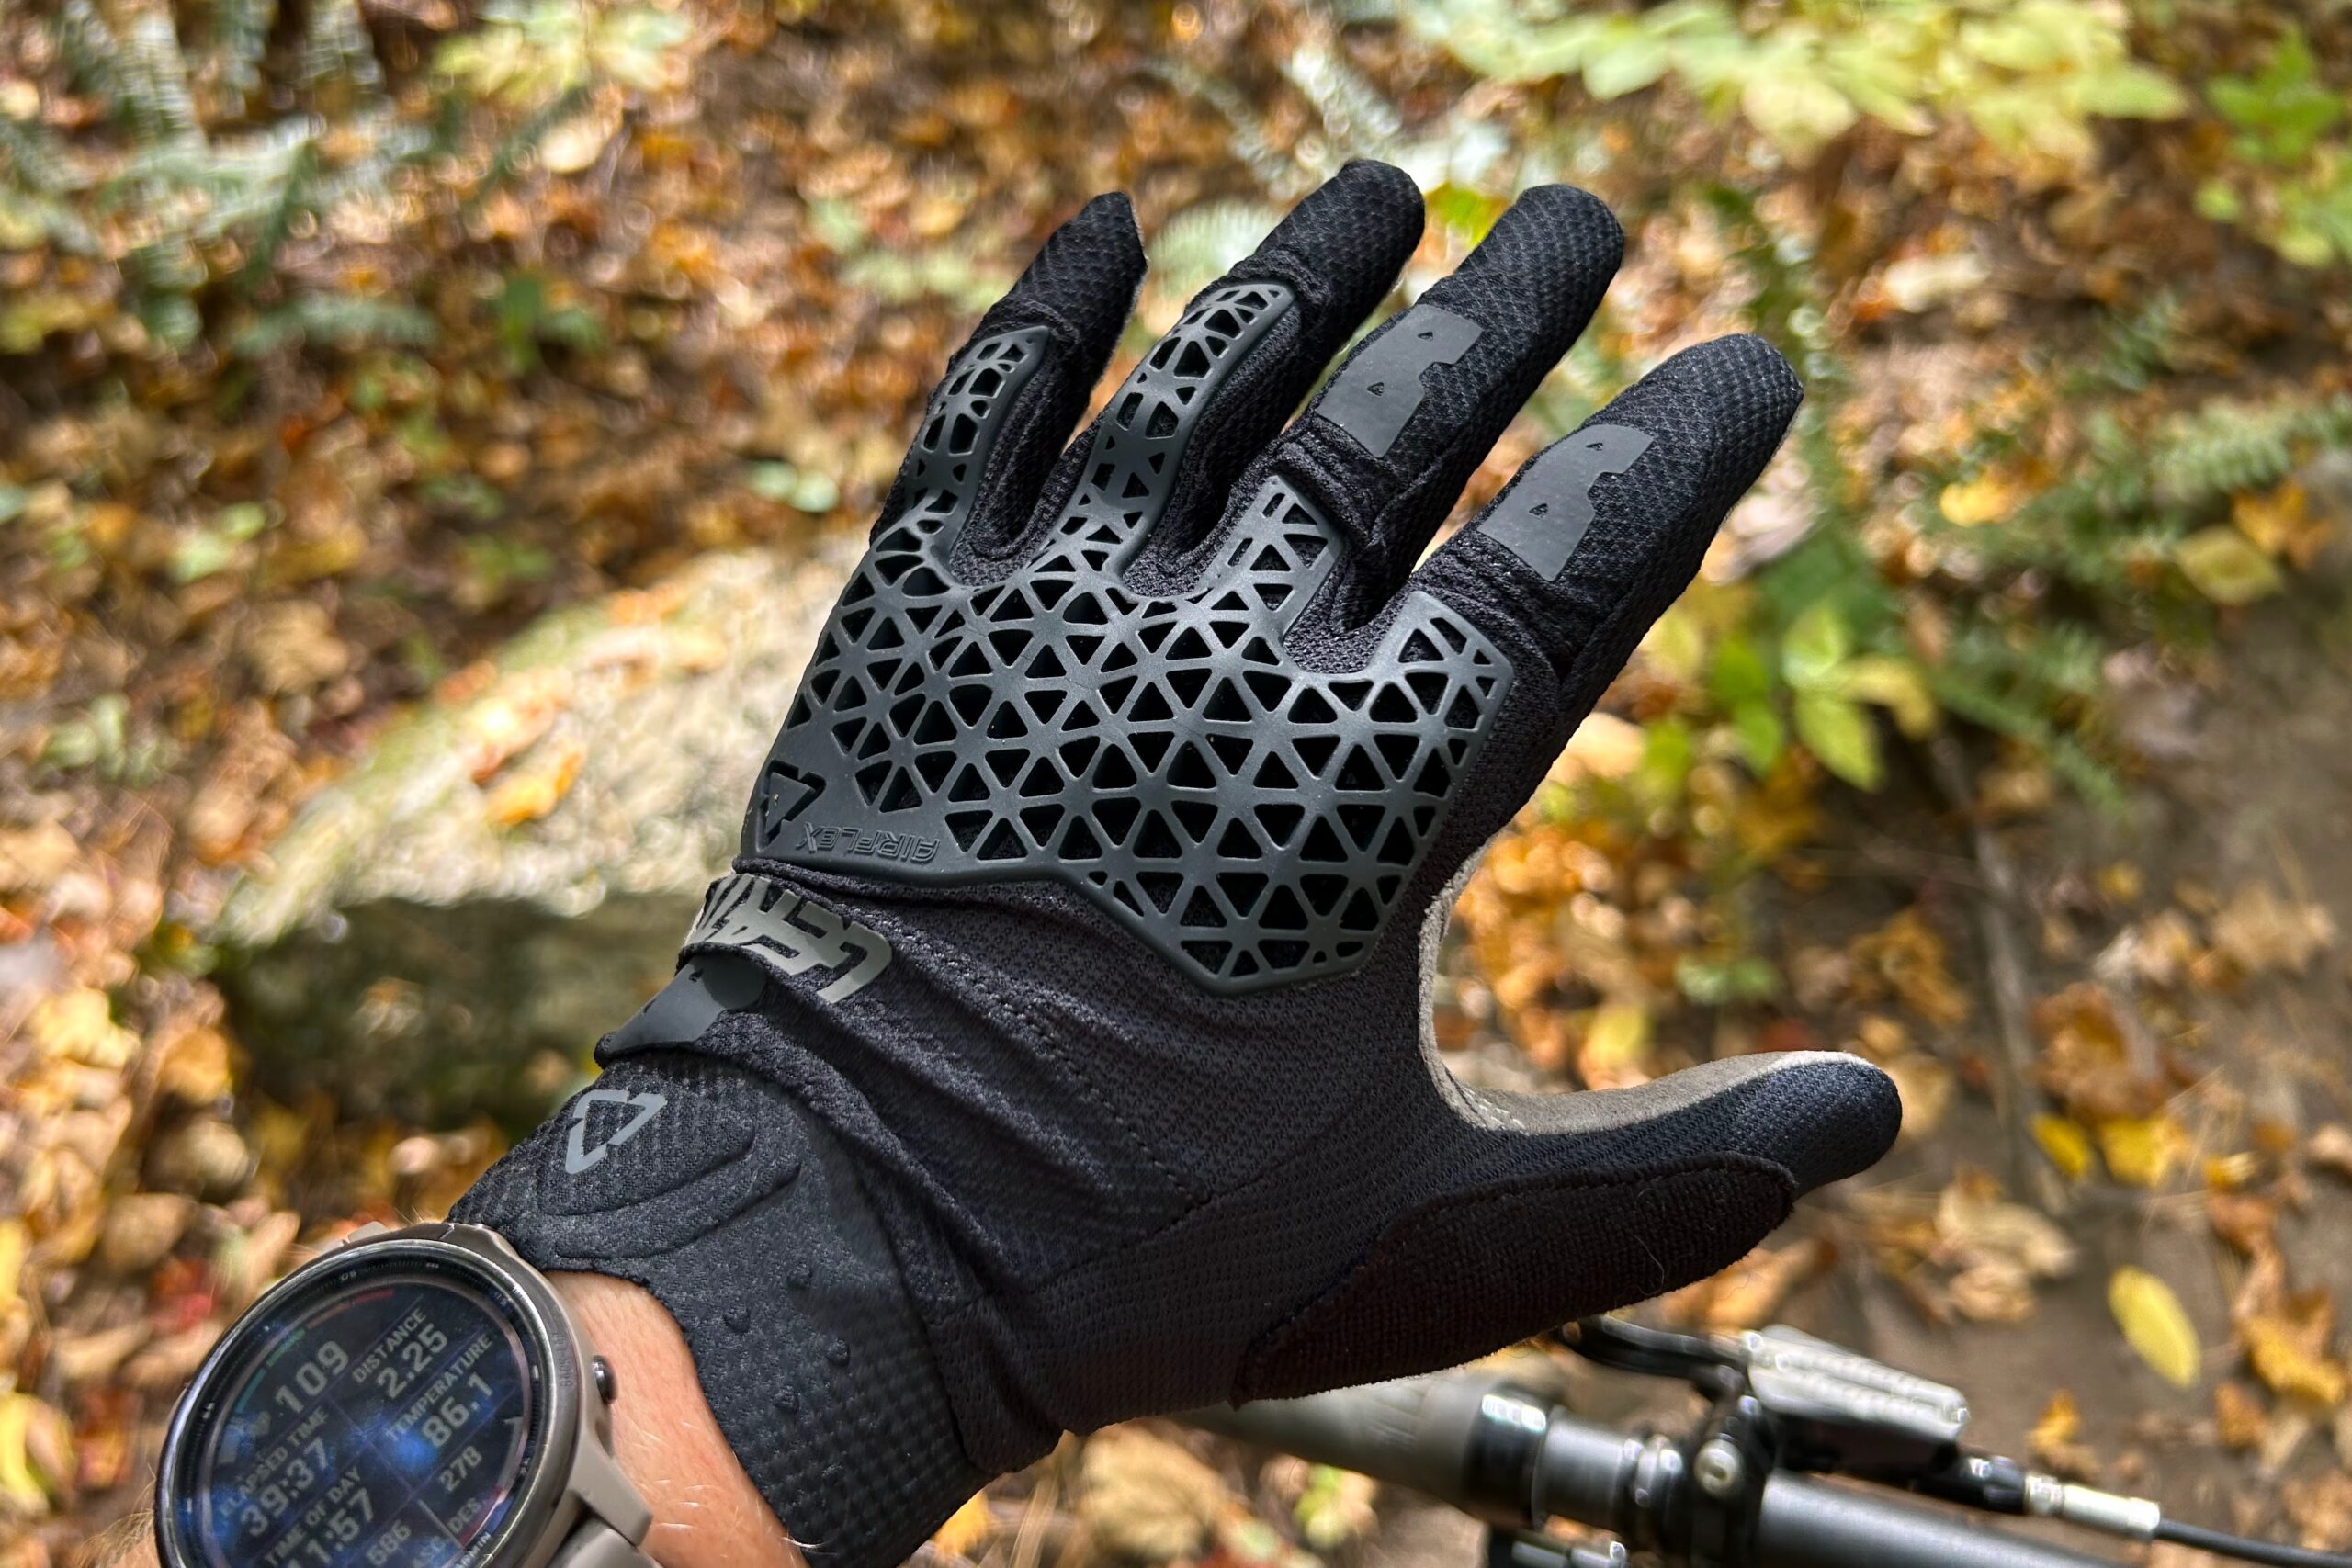 A close look at the knuckle protection on the Leatt MTB 4.0 Lite mountain bike gloves